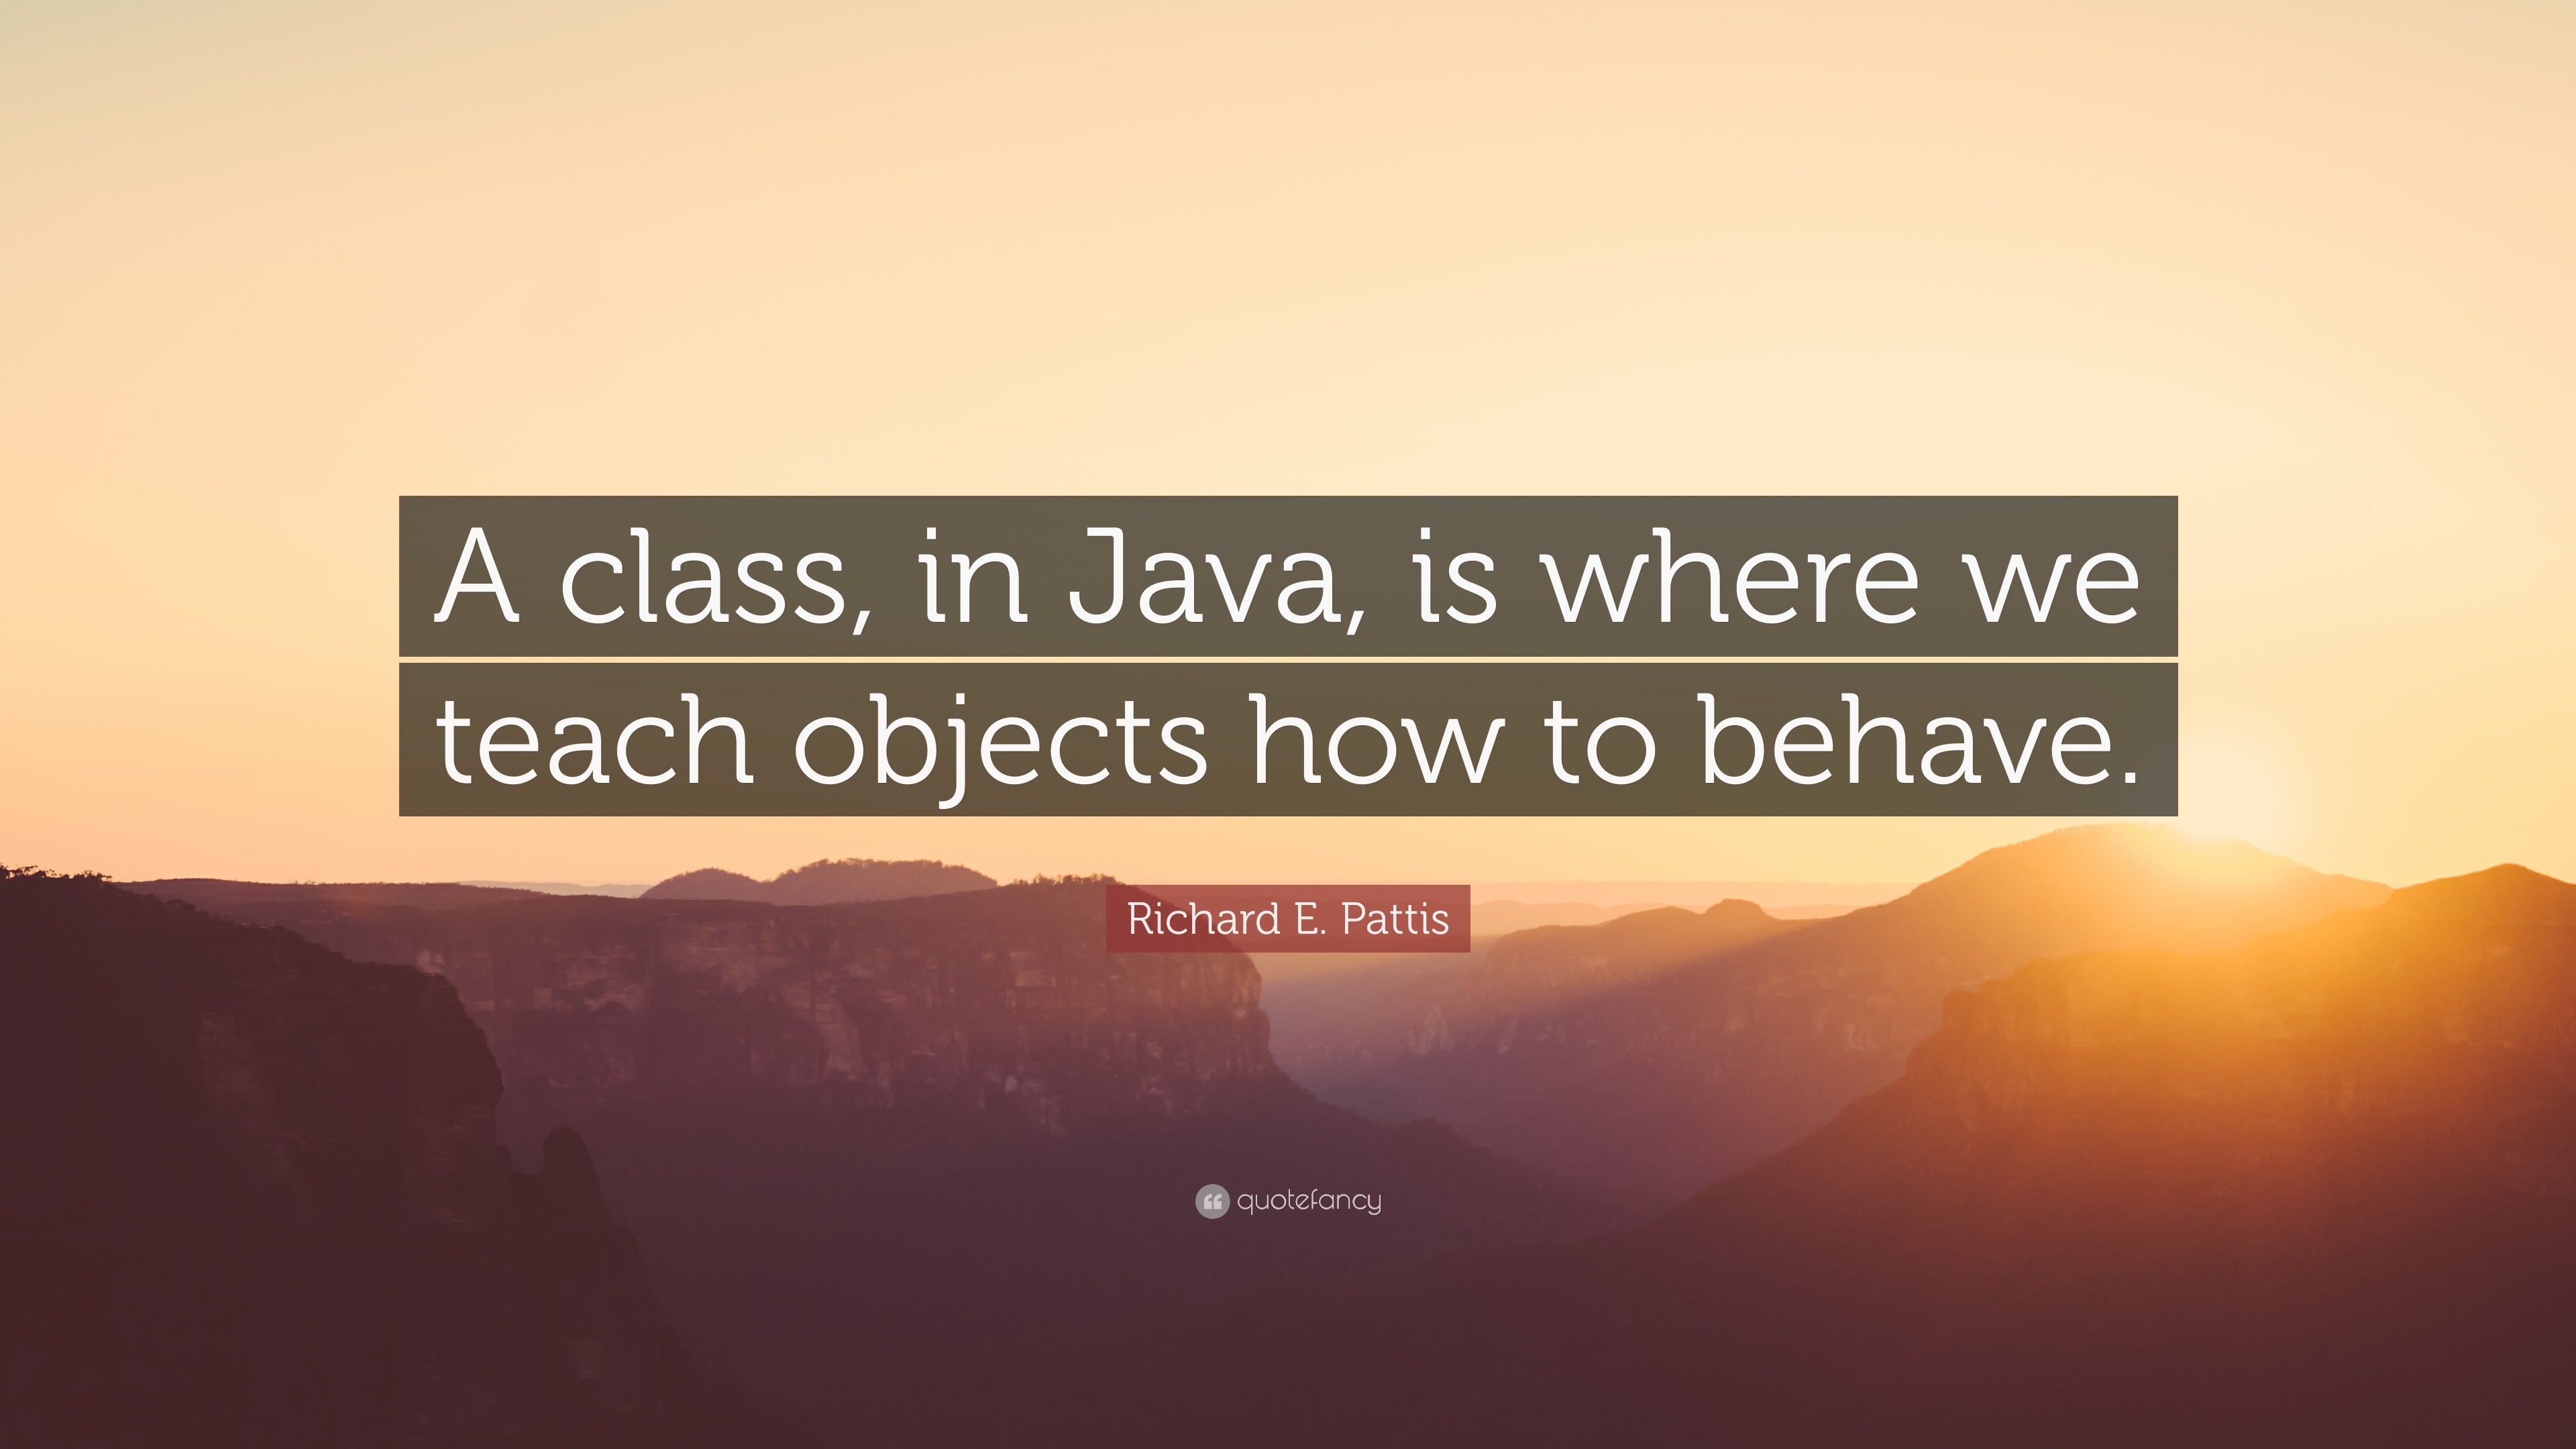 Richard E. Pattis Quote: “A class, in Java, is where we teach objects